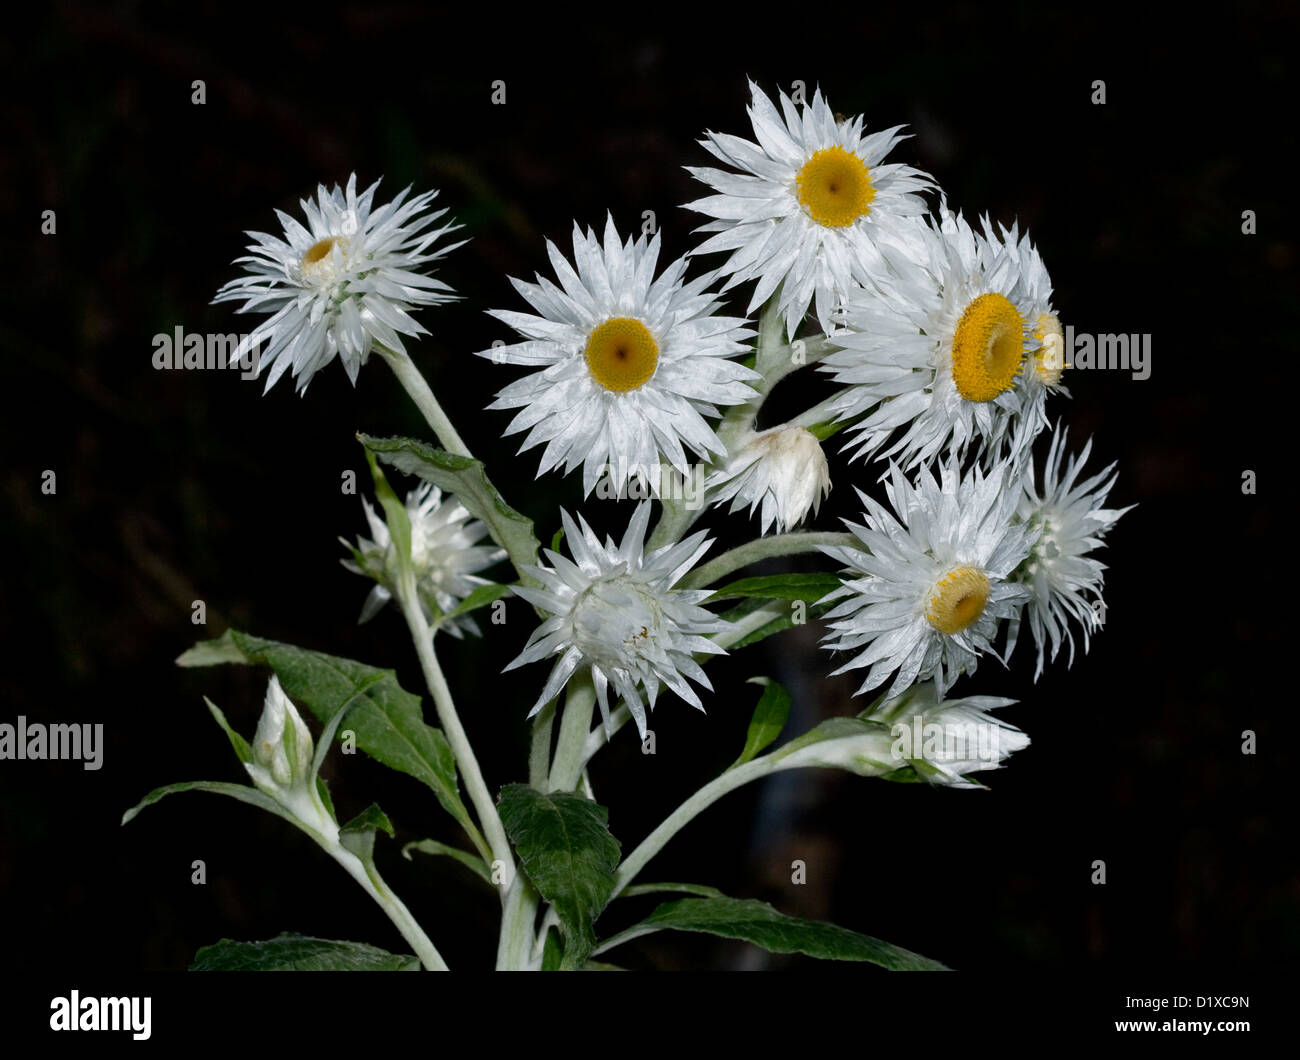 Cluster of white flowers of Bracteantha papillosum syn Helichrysum - everlasting daisy - against a black background Stock Photo